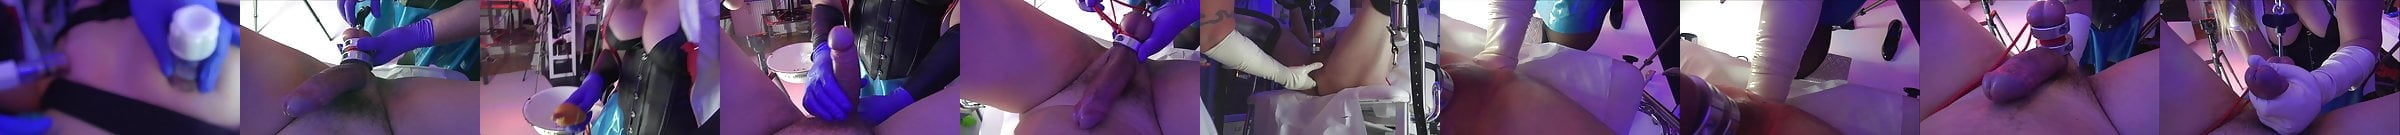 Cock Injections Toys Super Nurse Part 3 Of 2 Free Porn E9